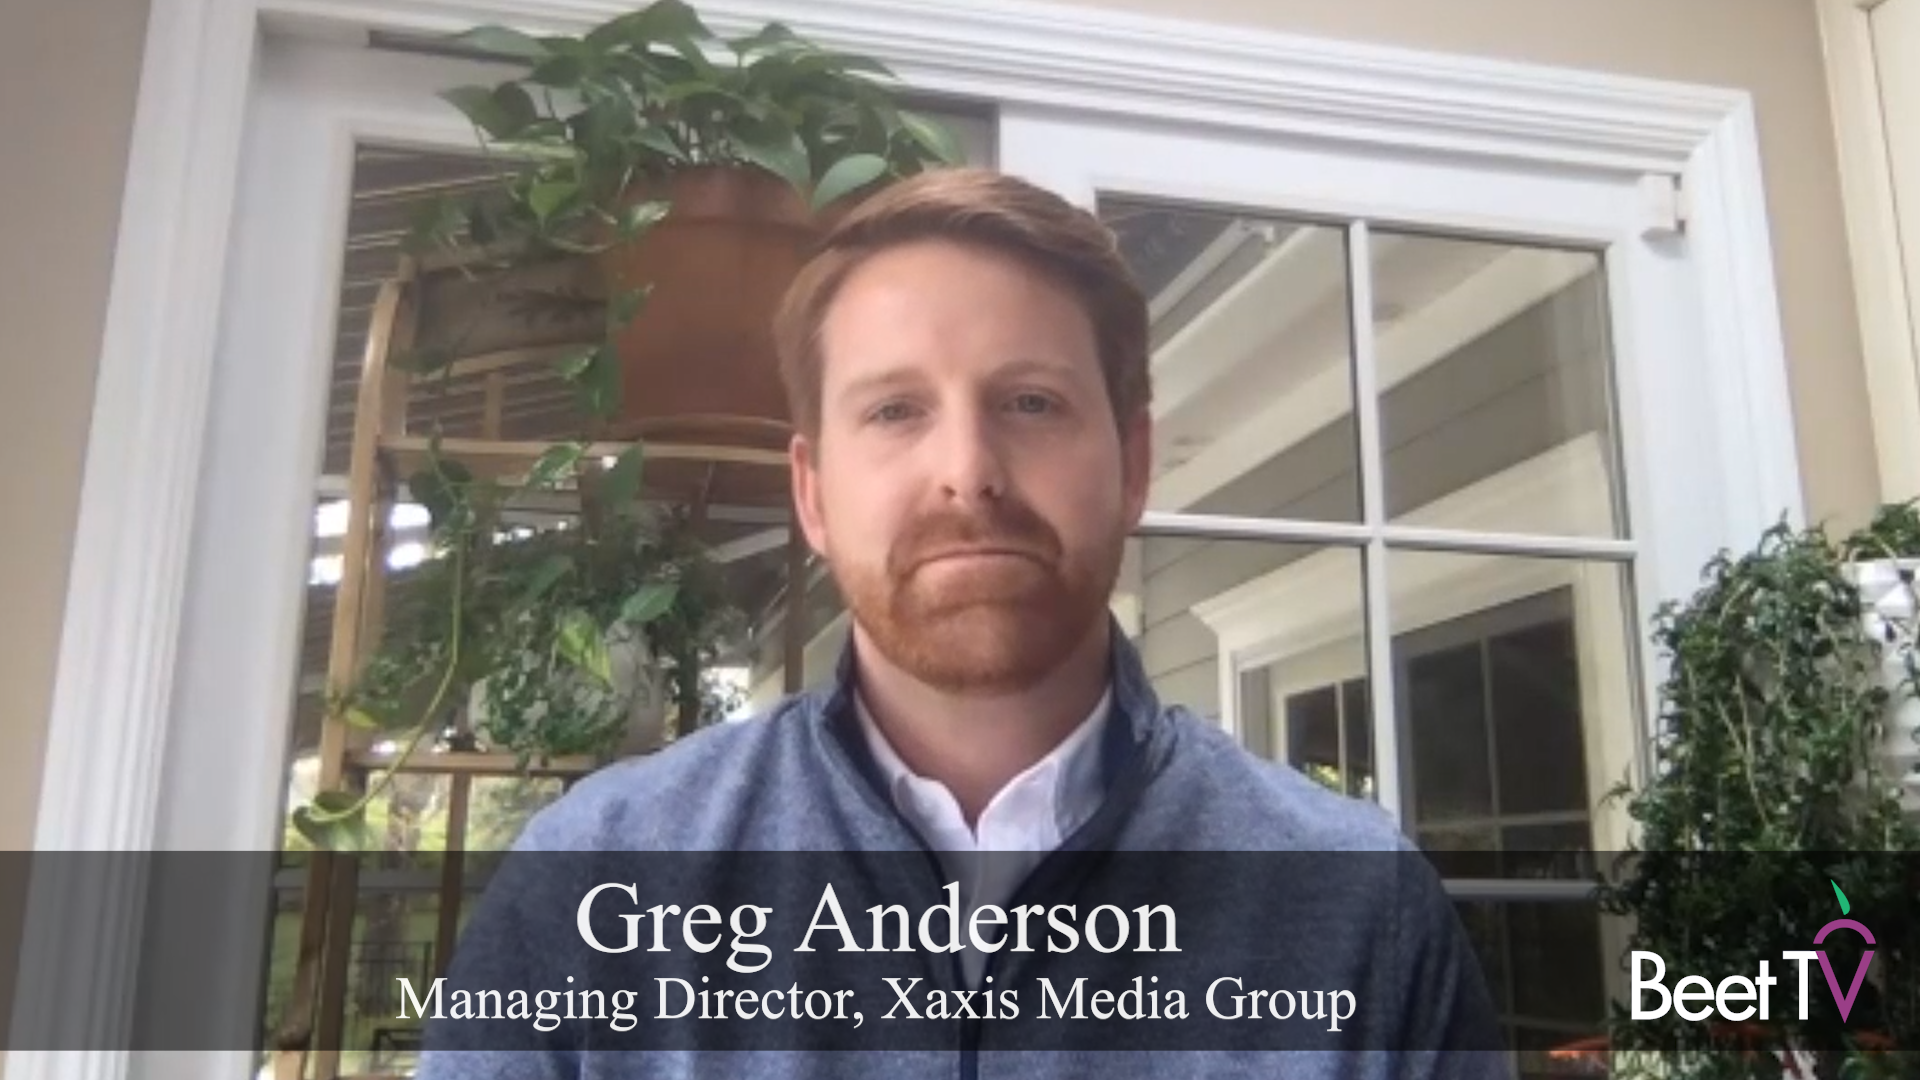 Dynamic Creative Helps Brand Suitability During Change: Xaxis’